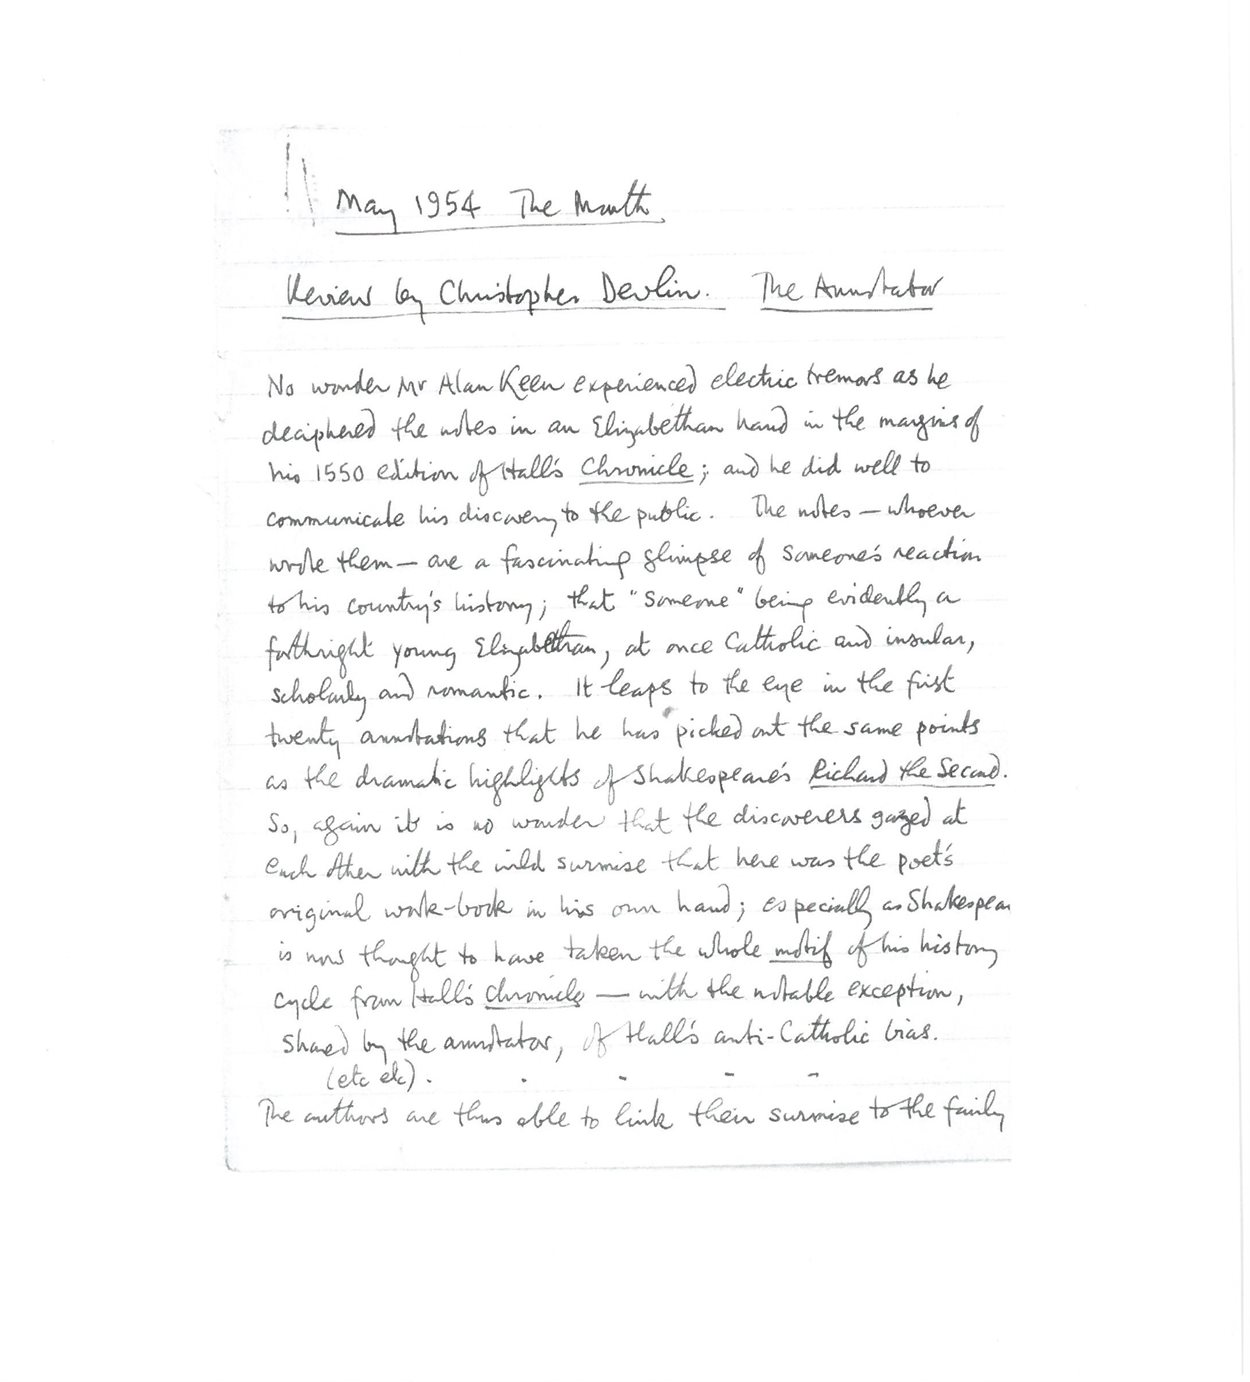 Image of a handwritten review of Keen's book